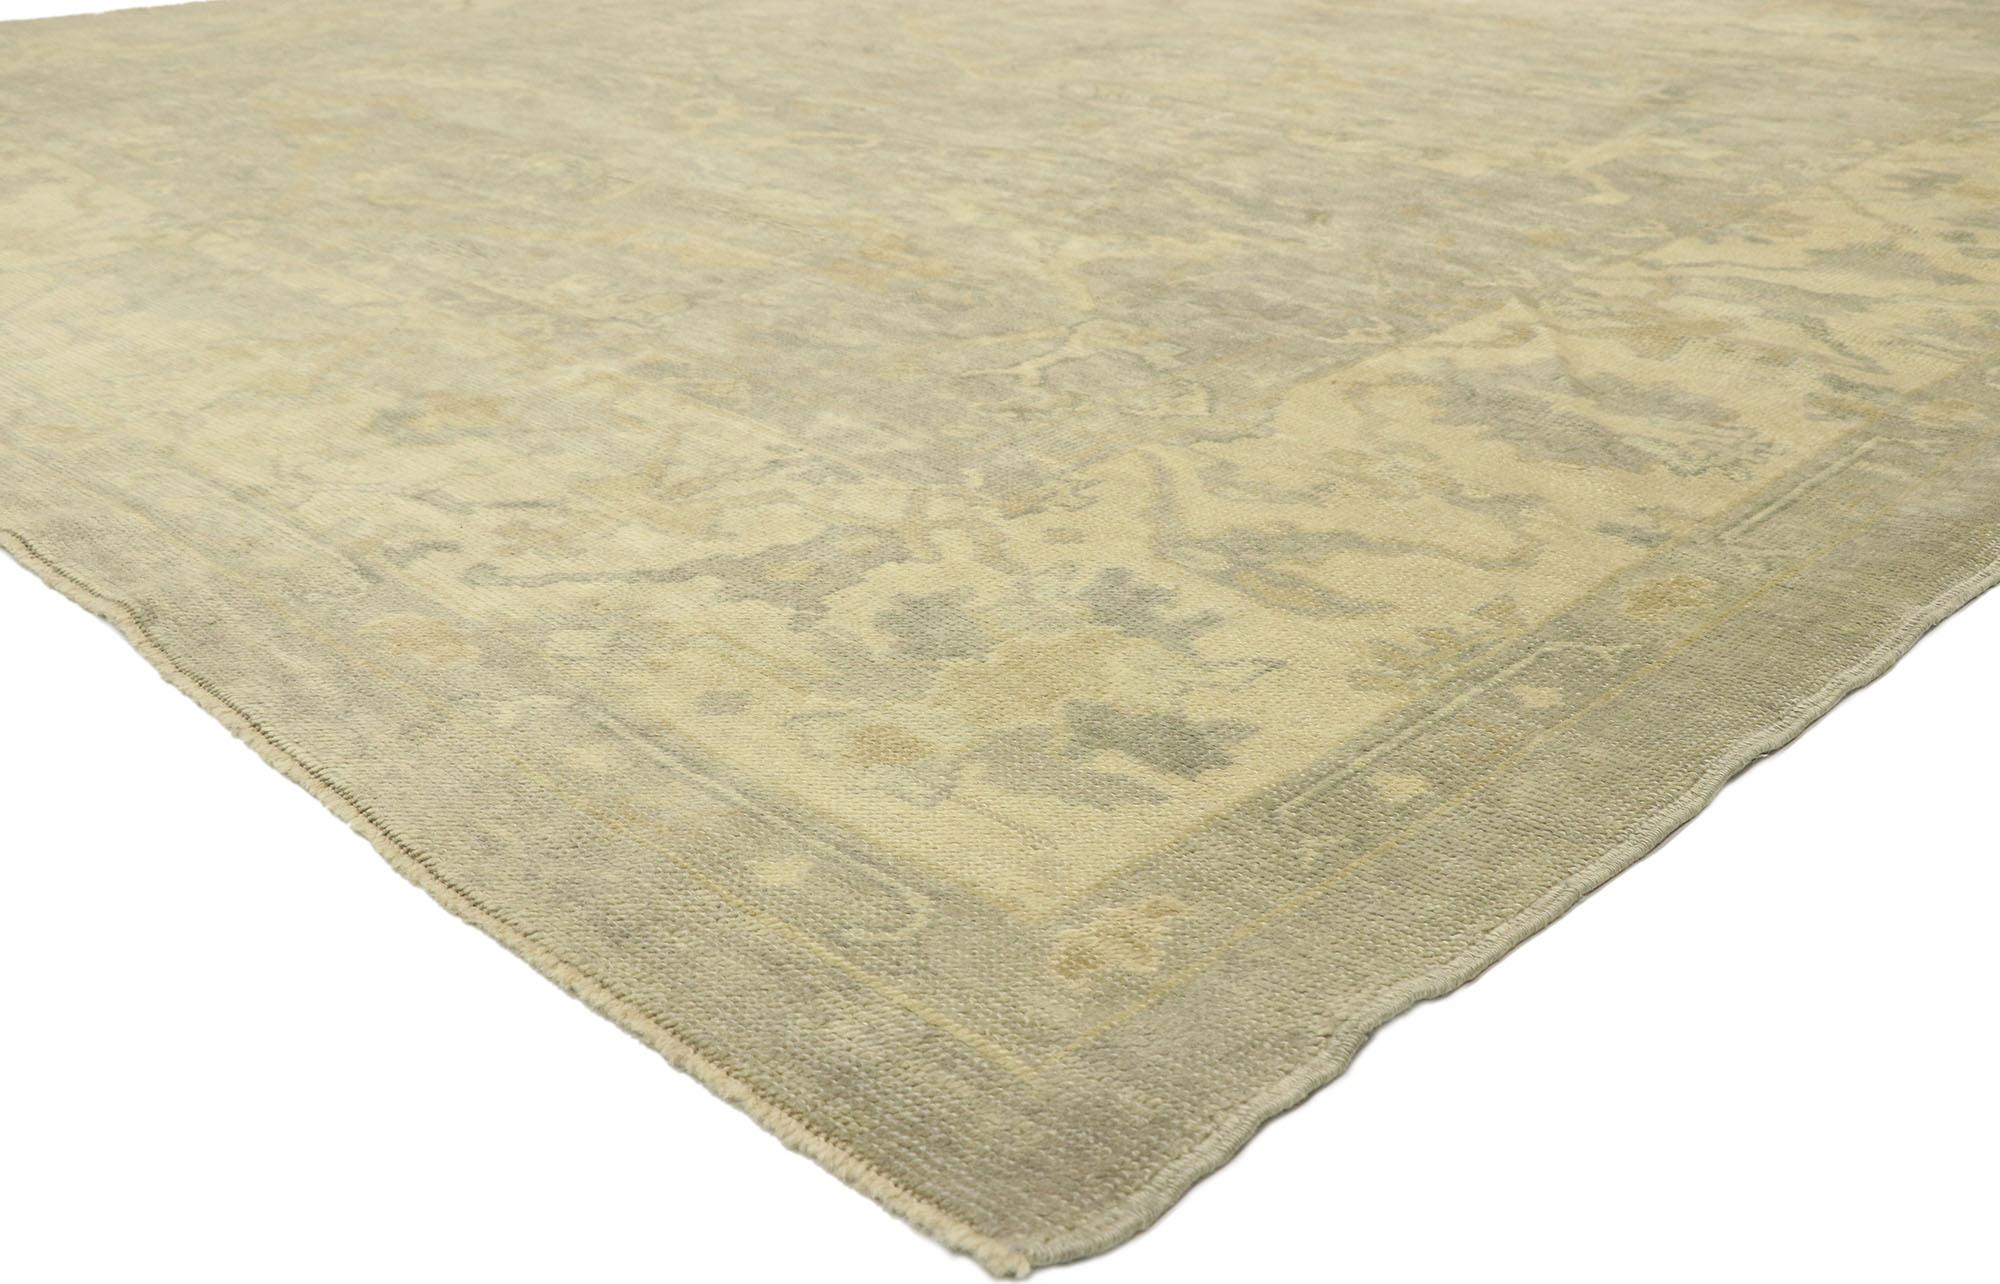 51858 New Contemporary Turkish Oushak rug with Transitional Style 10'10 x 12'08. Polished and playful, this hand-knotted wool contemporary Turkish Oushak rug beautifully embodies a modern style. The abrashed gray field features a colorful array of